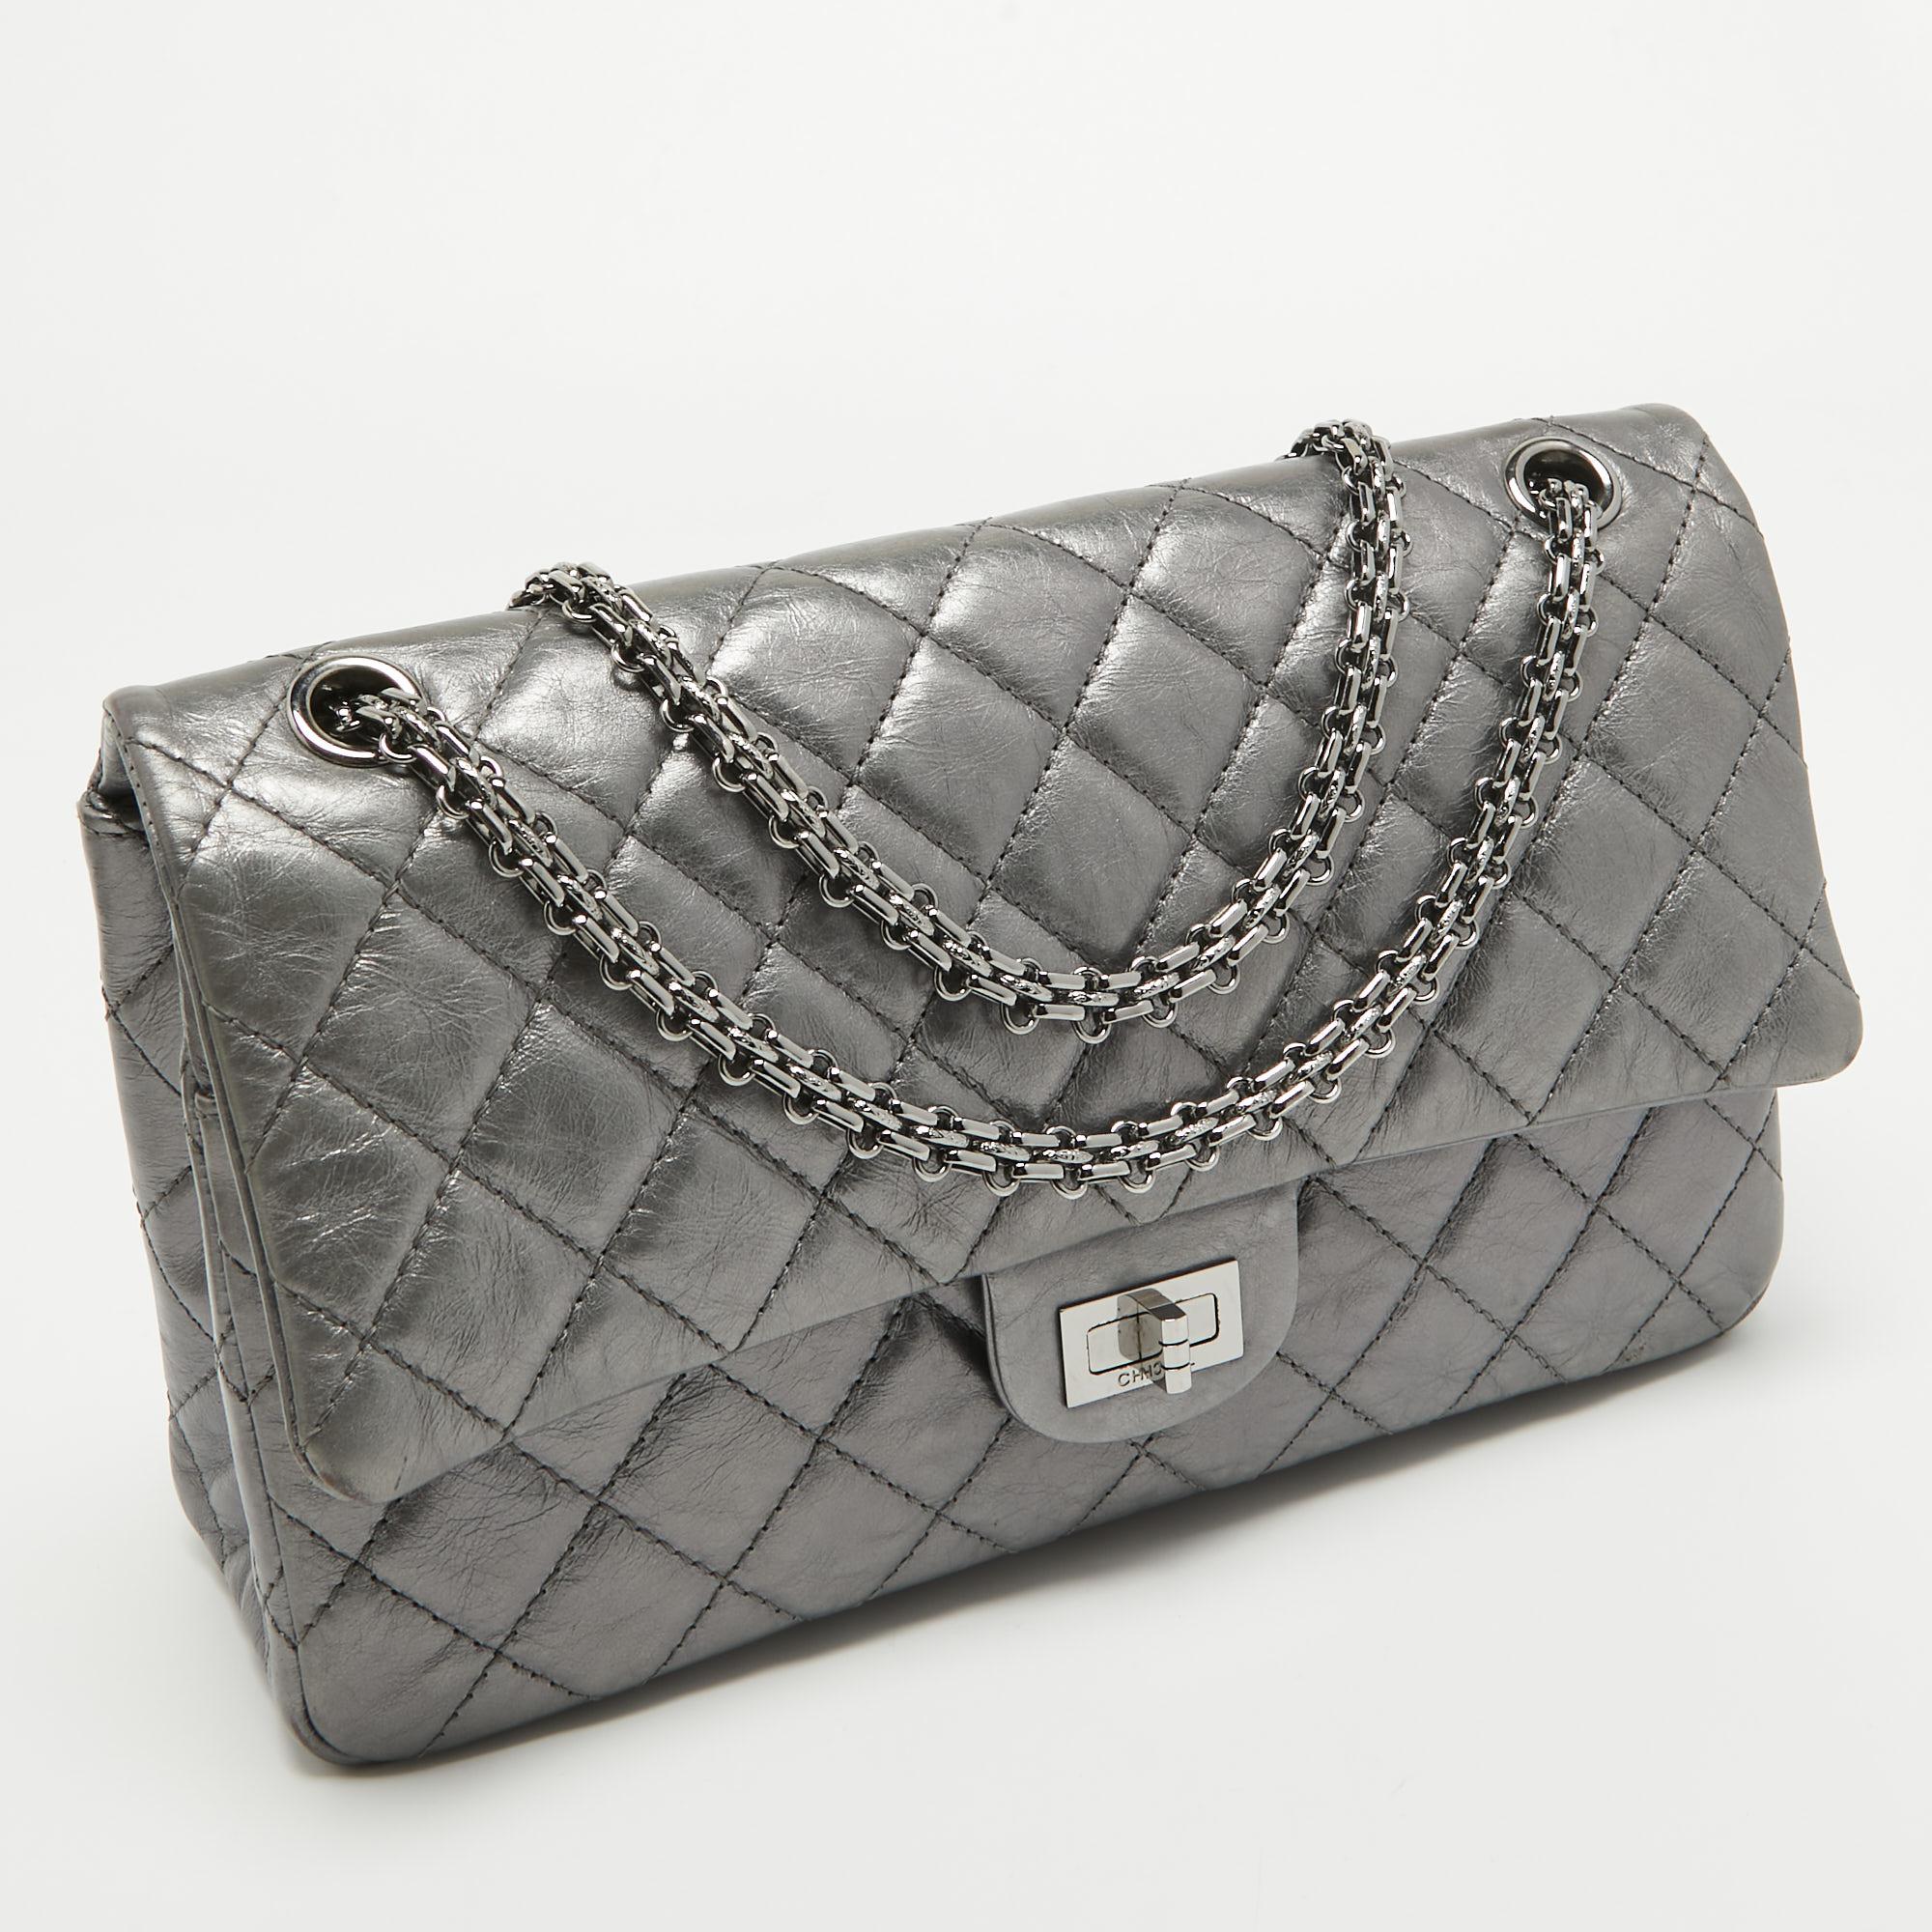 Chanel Metallic Grey Quilted Leather 226 Reissue 2.55 Flap Bag For Sale 12